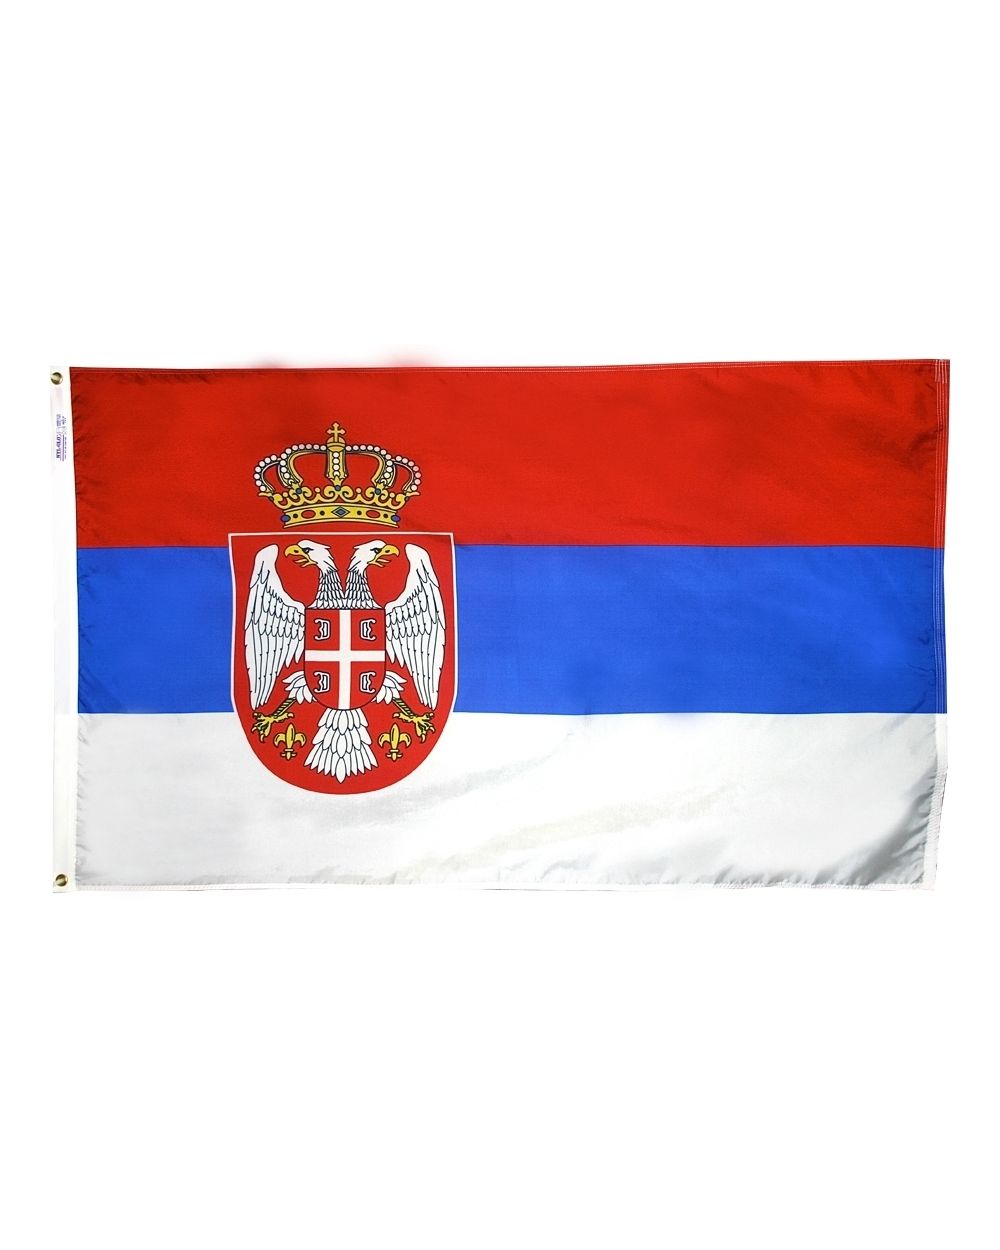 Serbia Flag 3 x 5 ft. for Outdoor Use.